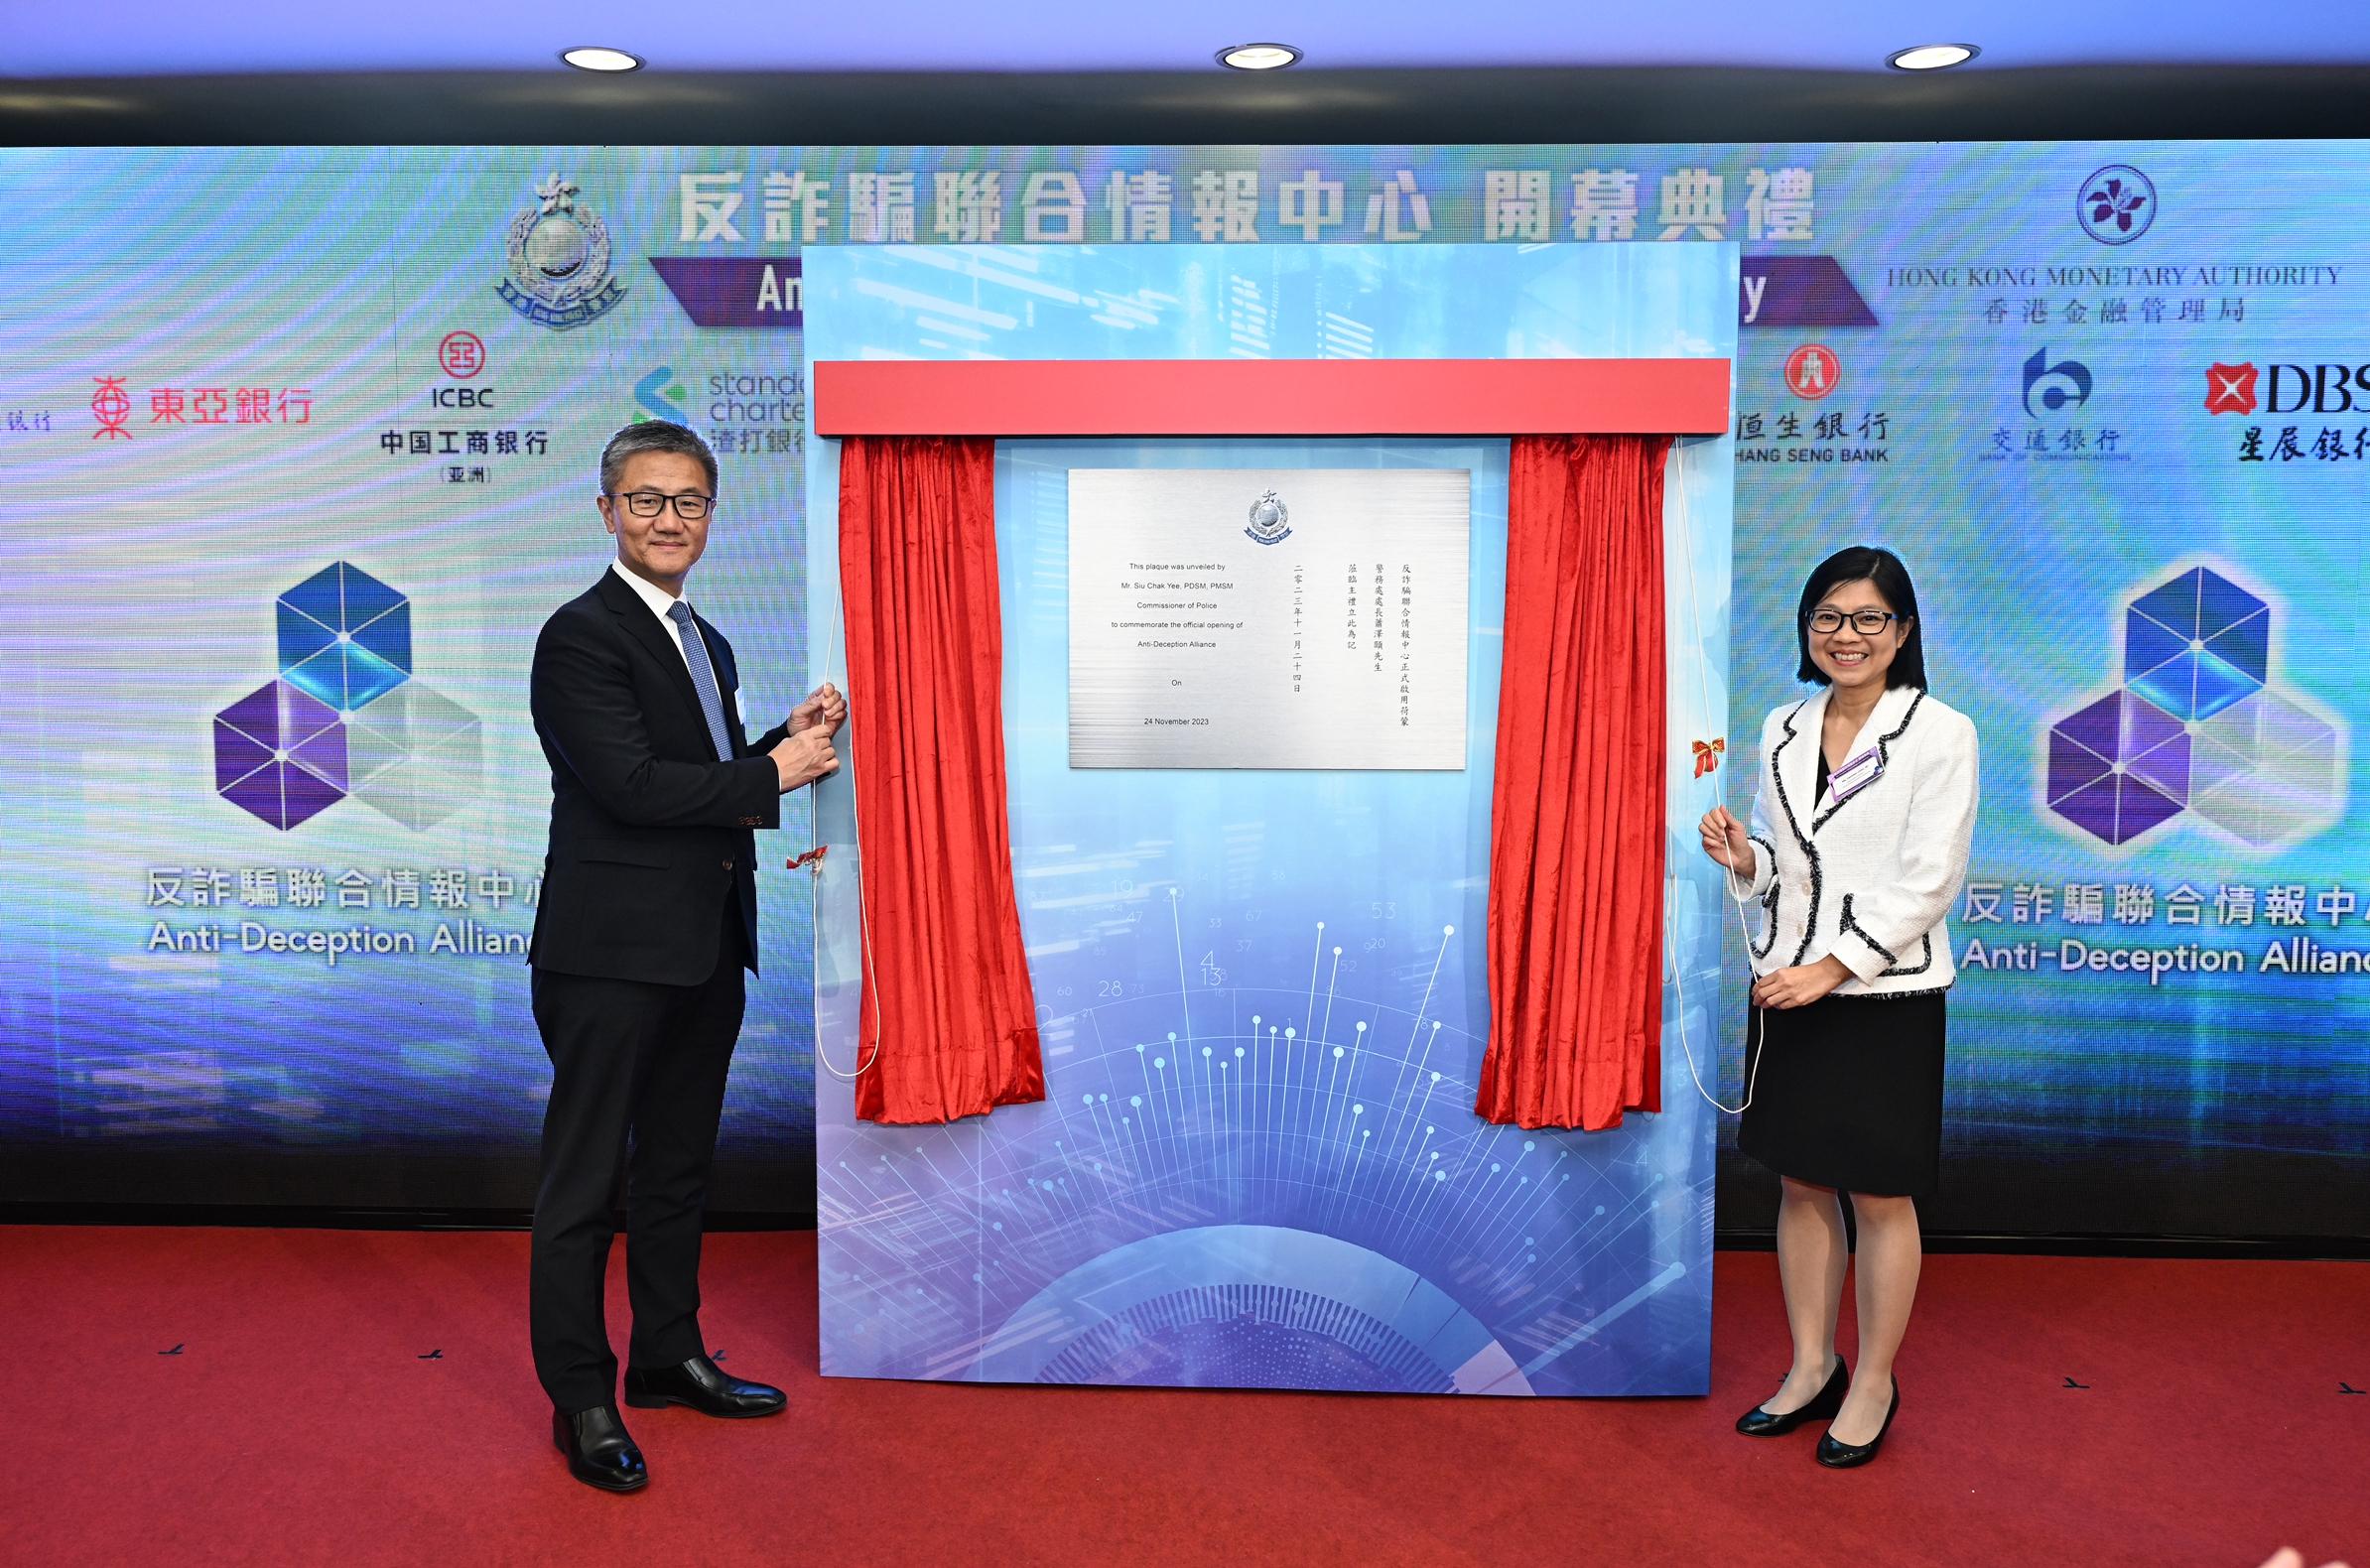 The Executive Director (Enforcement and AML) of the Hong Kong Monetary Authority, Ms Carmen Chu (right), and the Commissioner of Police, Mr Raymond Siu Chak-yee (left), unveil the plaque of Anti-Deception Alliance.